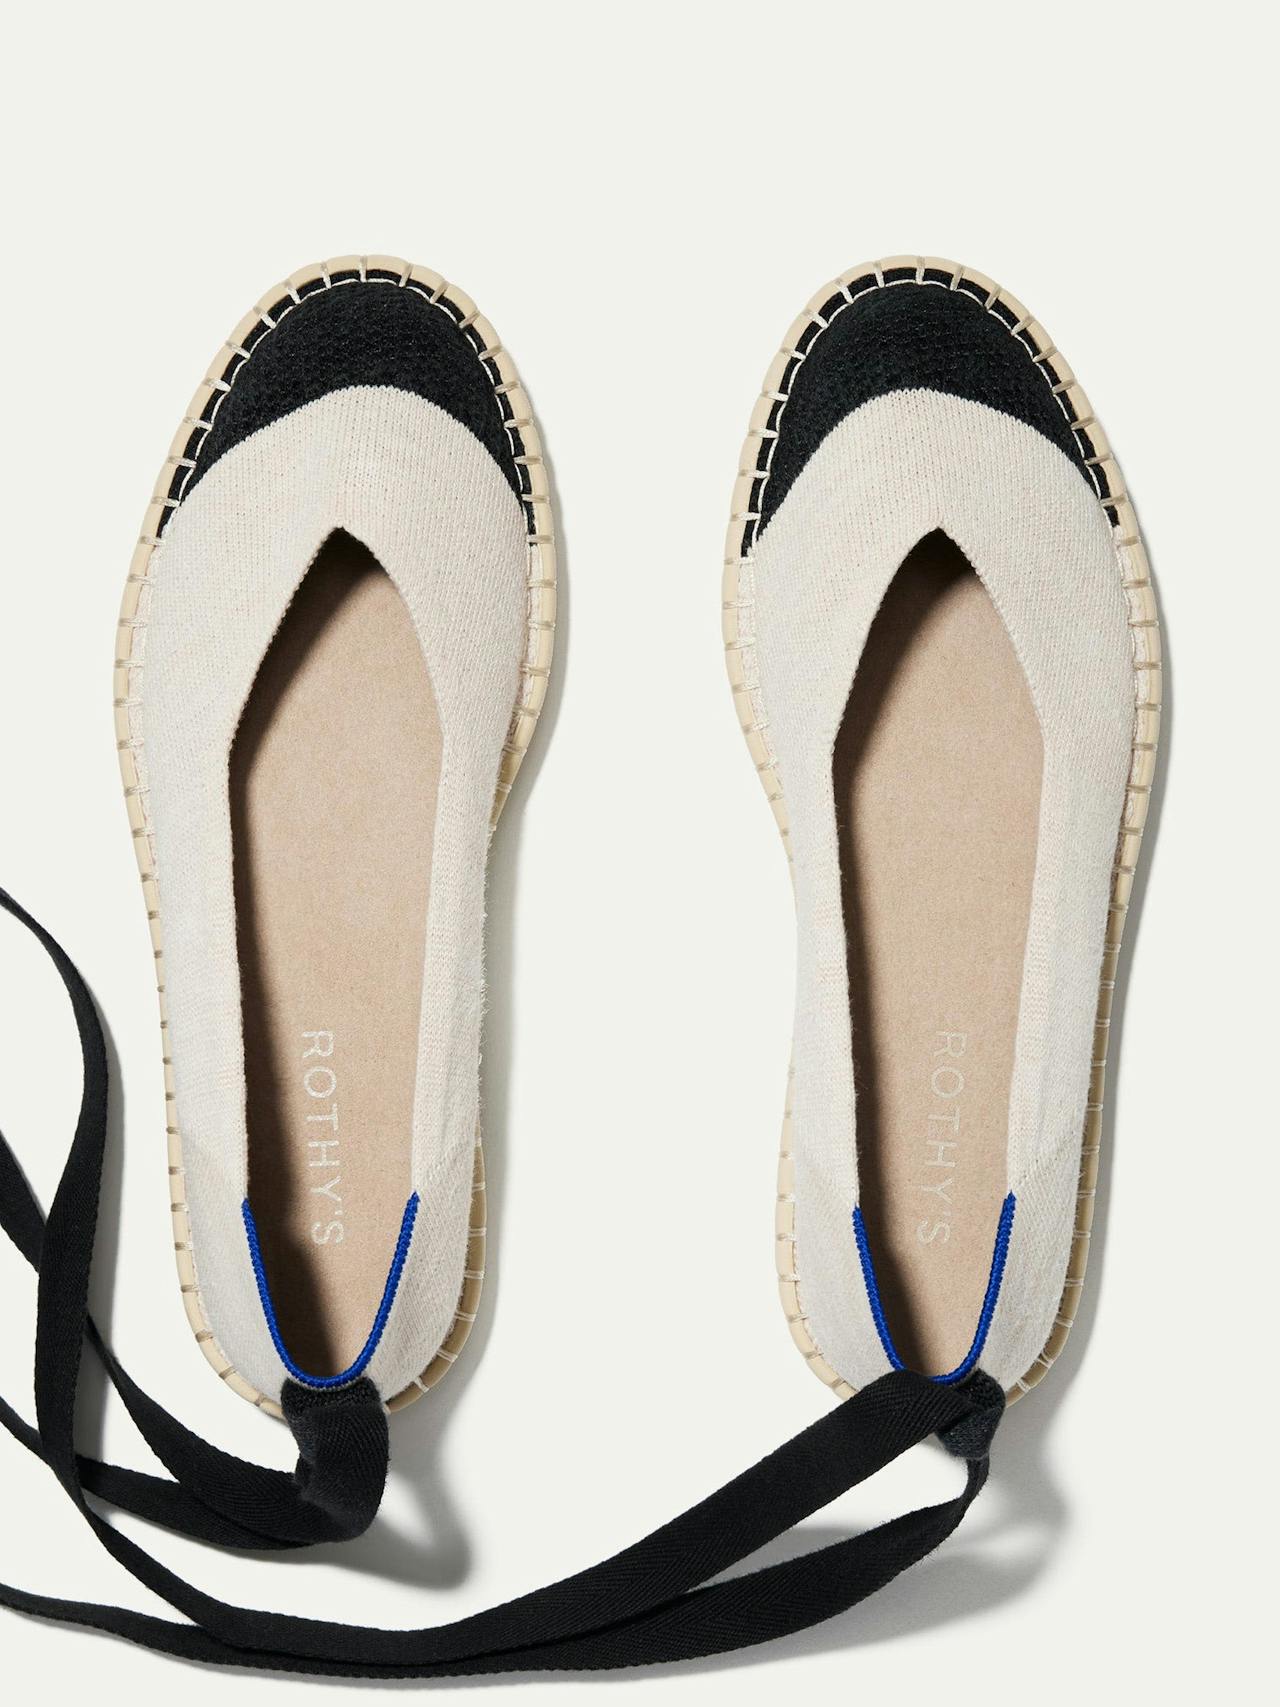 The Espadrilles in white